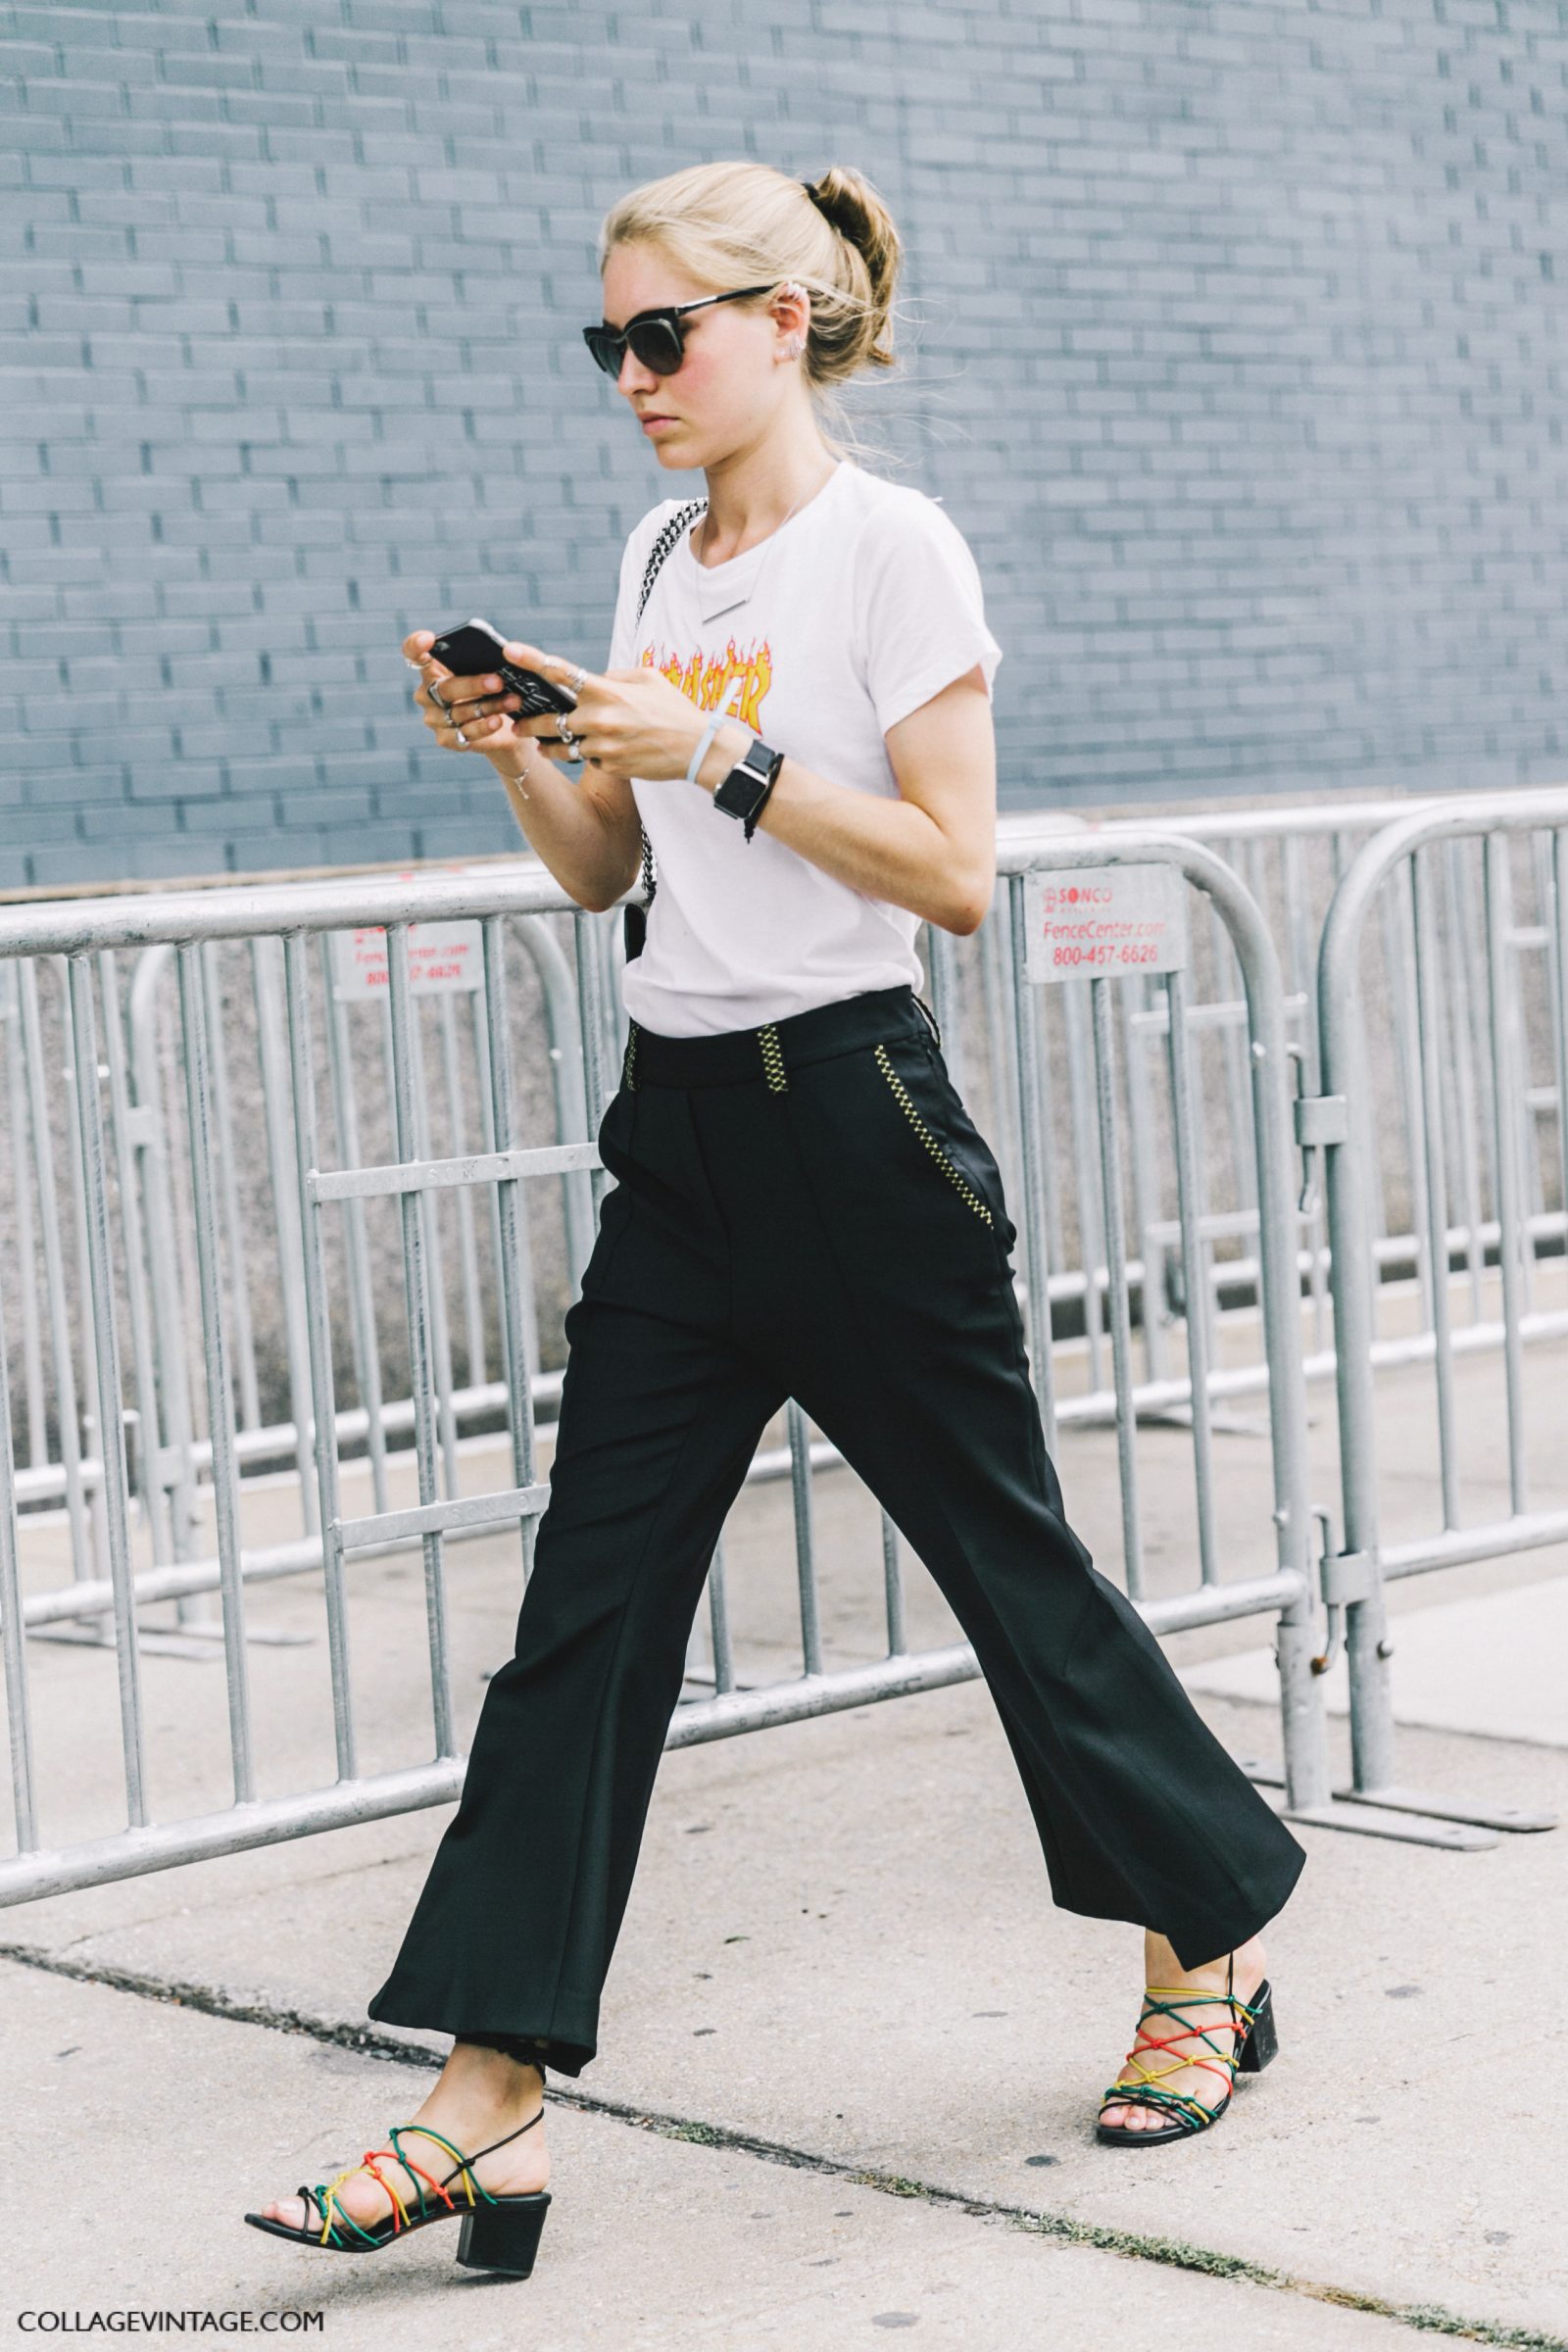 nyfw-new_york_fashion_week_ss17-street_style-outfits-collage_vintage-jessica_minkoff-earrings-graphic_tee-black_trousers-chloe_sandals-gucci_bag